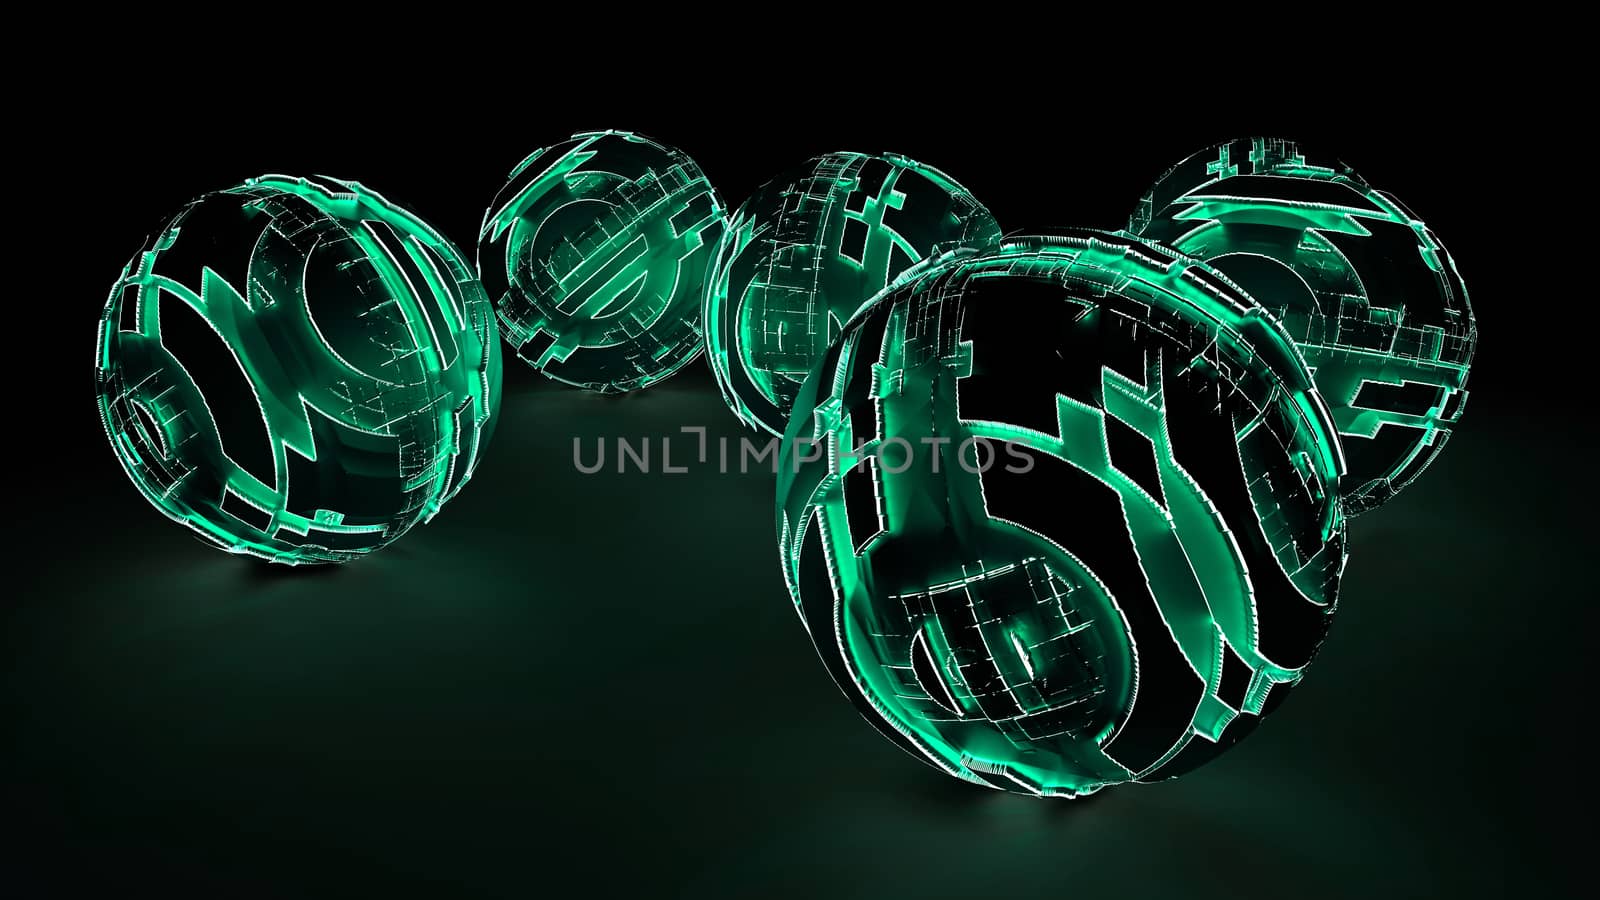 Abstract Futuristic Spheres Glowing Green Light Lay On The Black Surface. Futuristic Background. 3D Illustrations